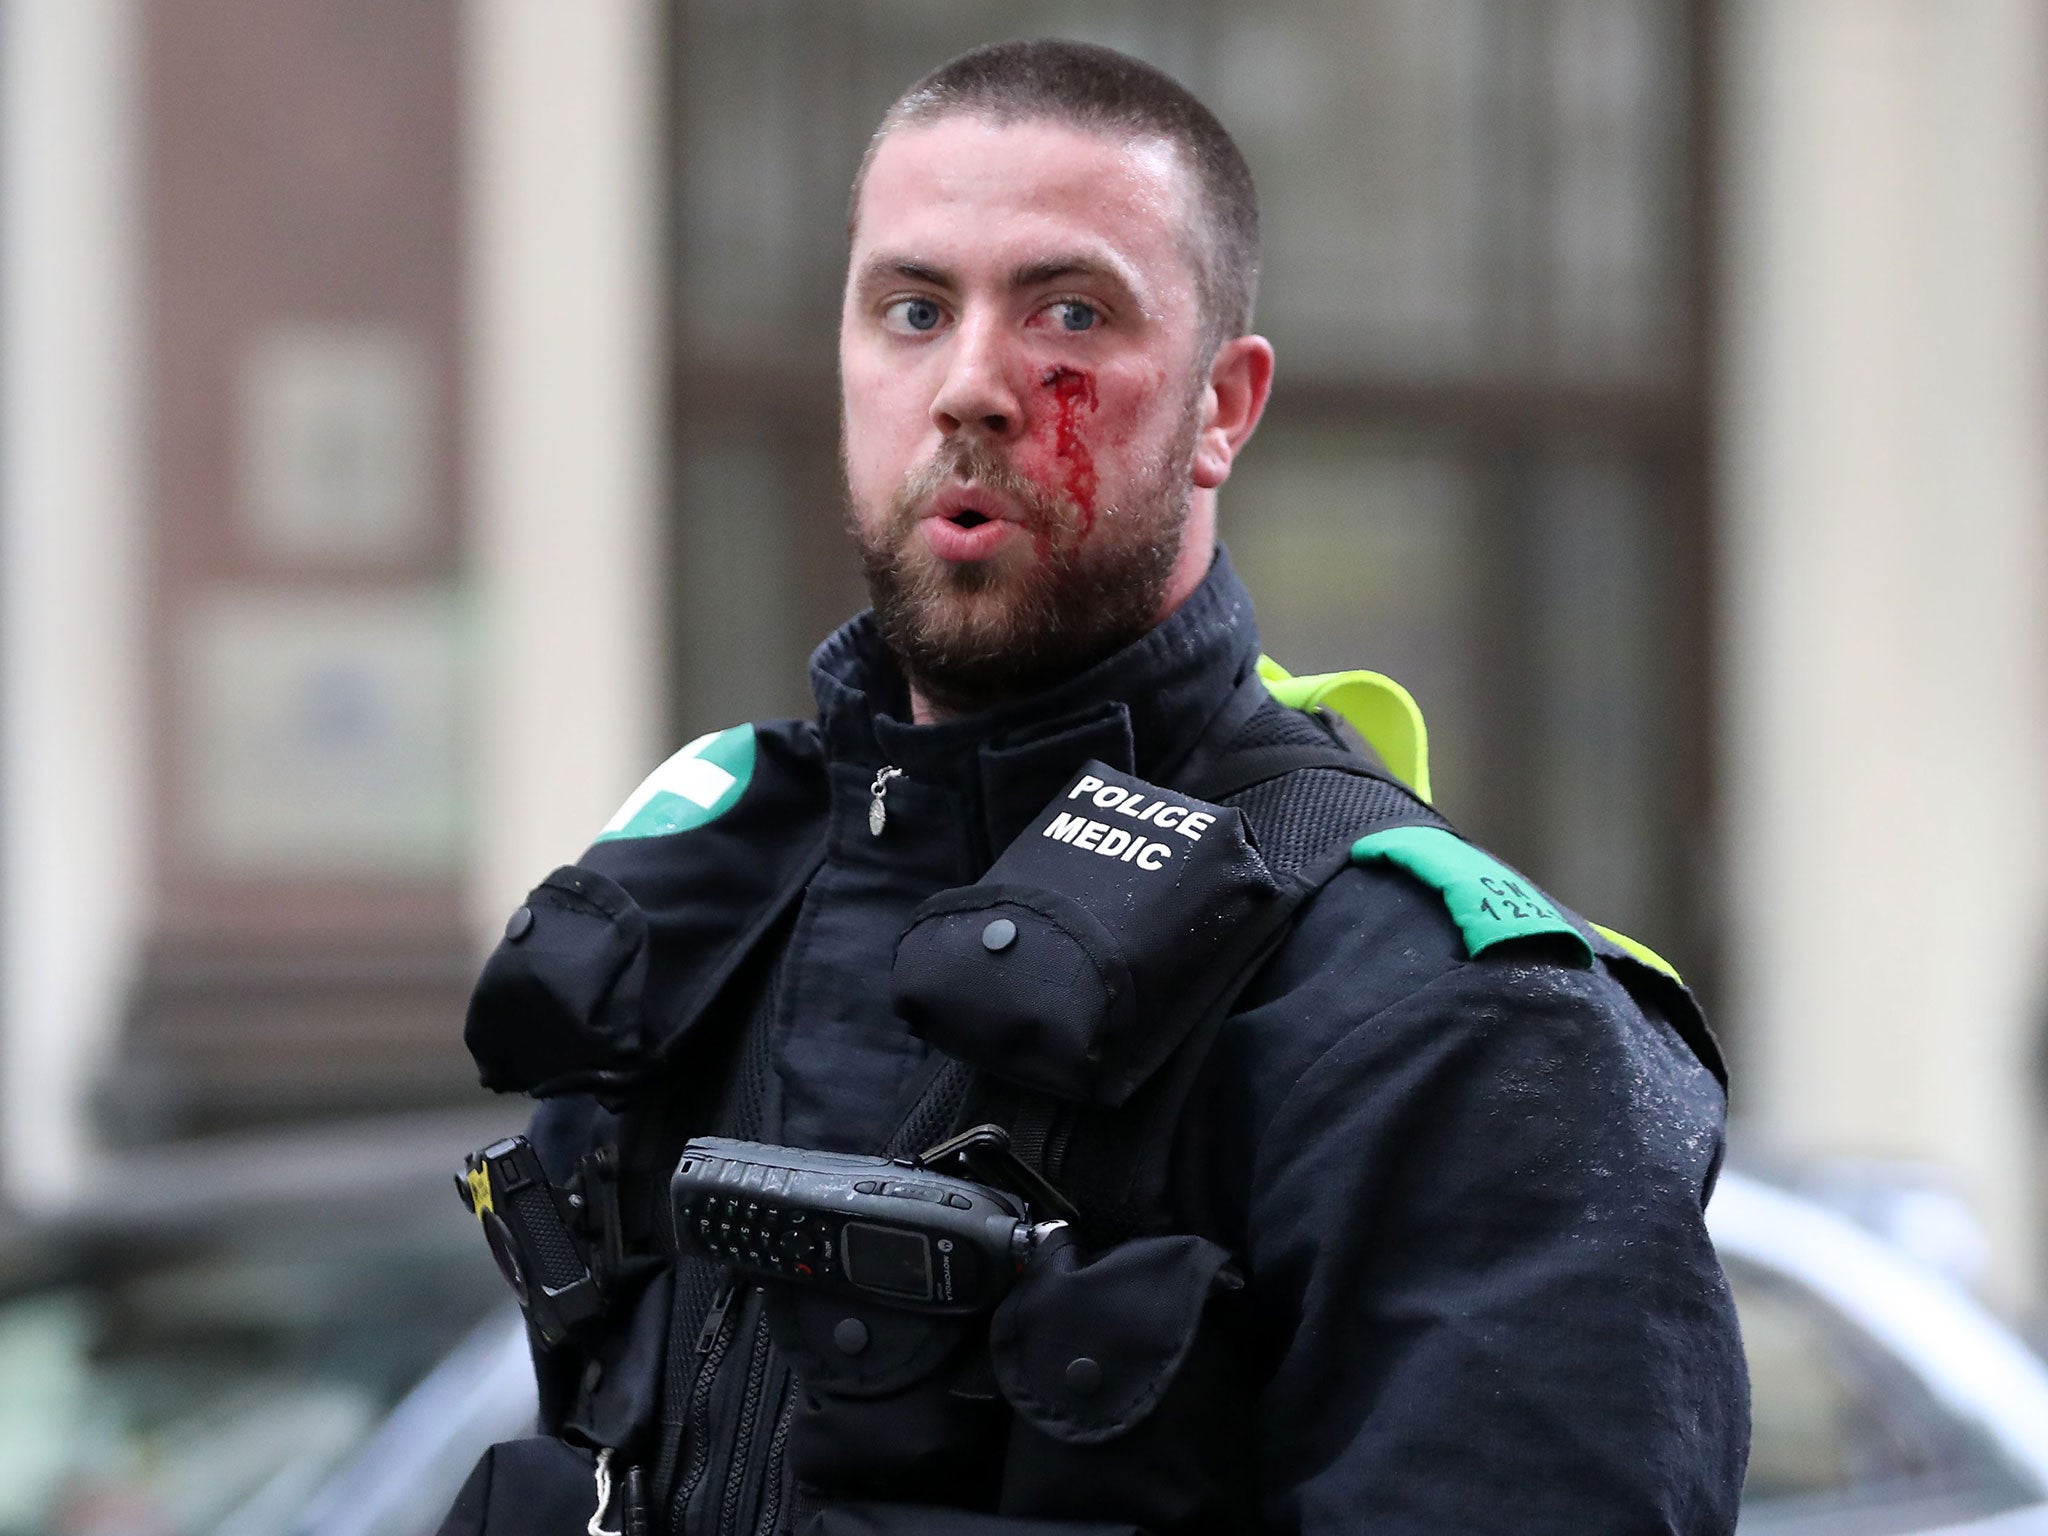 An injured police officer during a ‘Free Tommy Robinson’ protest in London on 9 June